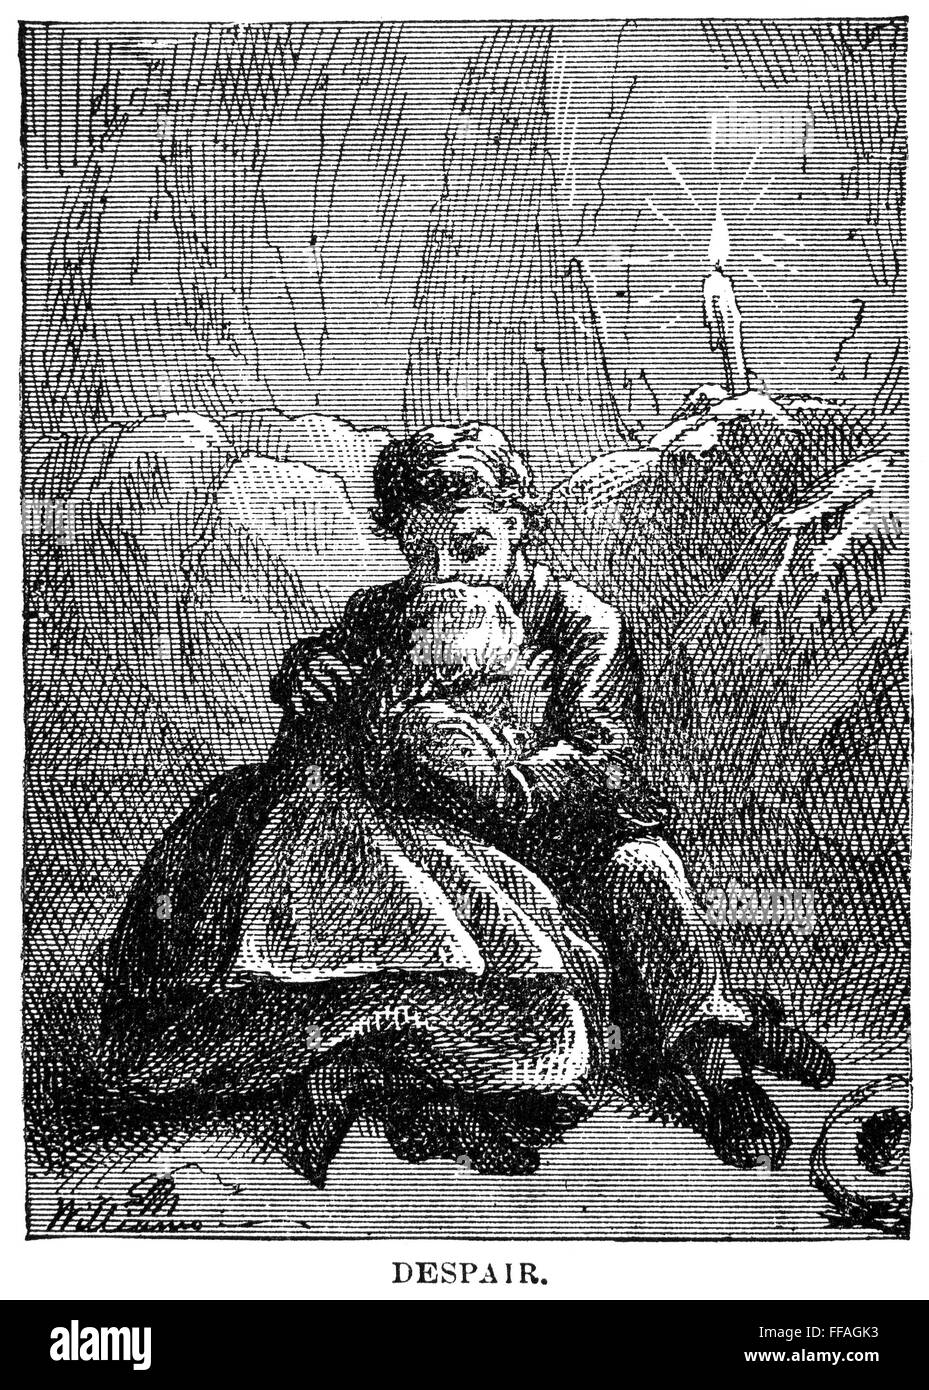 CLEMENS: TOM SAWYER. /nWood engraving after a drawing by True Williams for the first edition of Mark Twain's 'The Adventures of Tom Sawyer,' 1876. Stock Photo